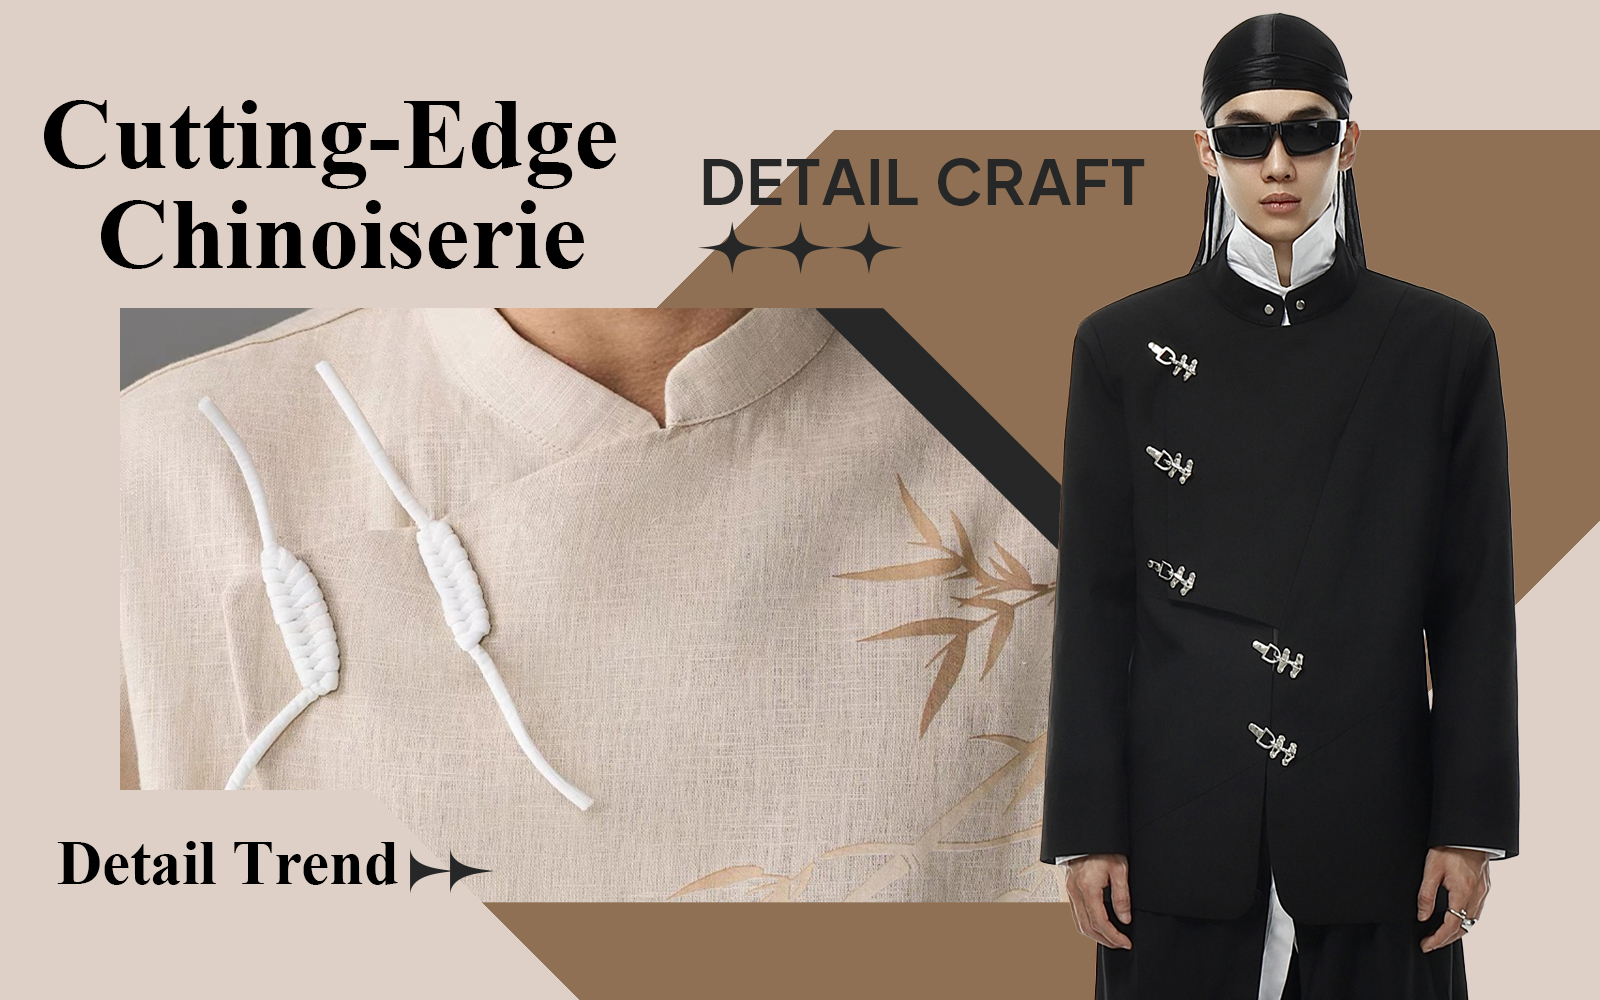 Cutting-edge Chinese Style - Men's Fashion Detail Craft Trends